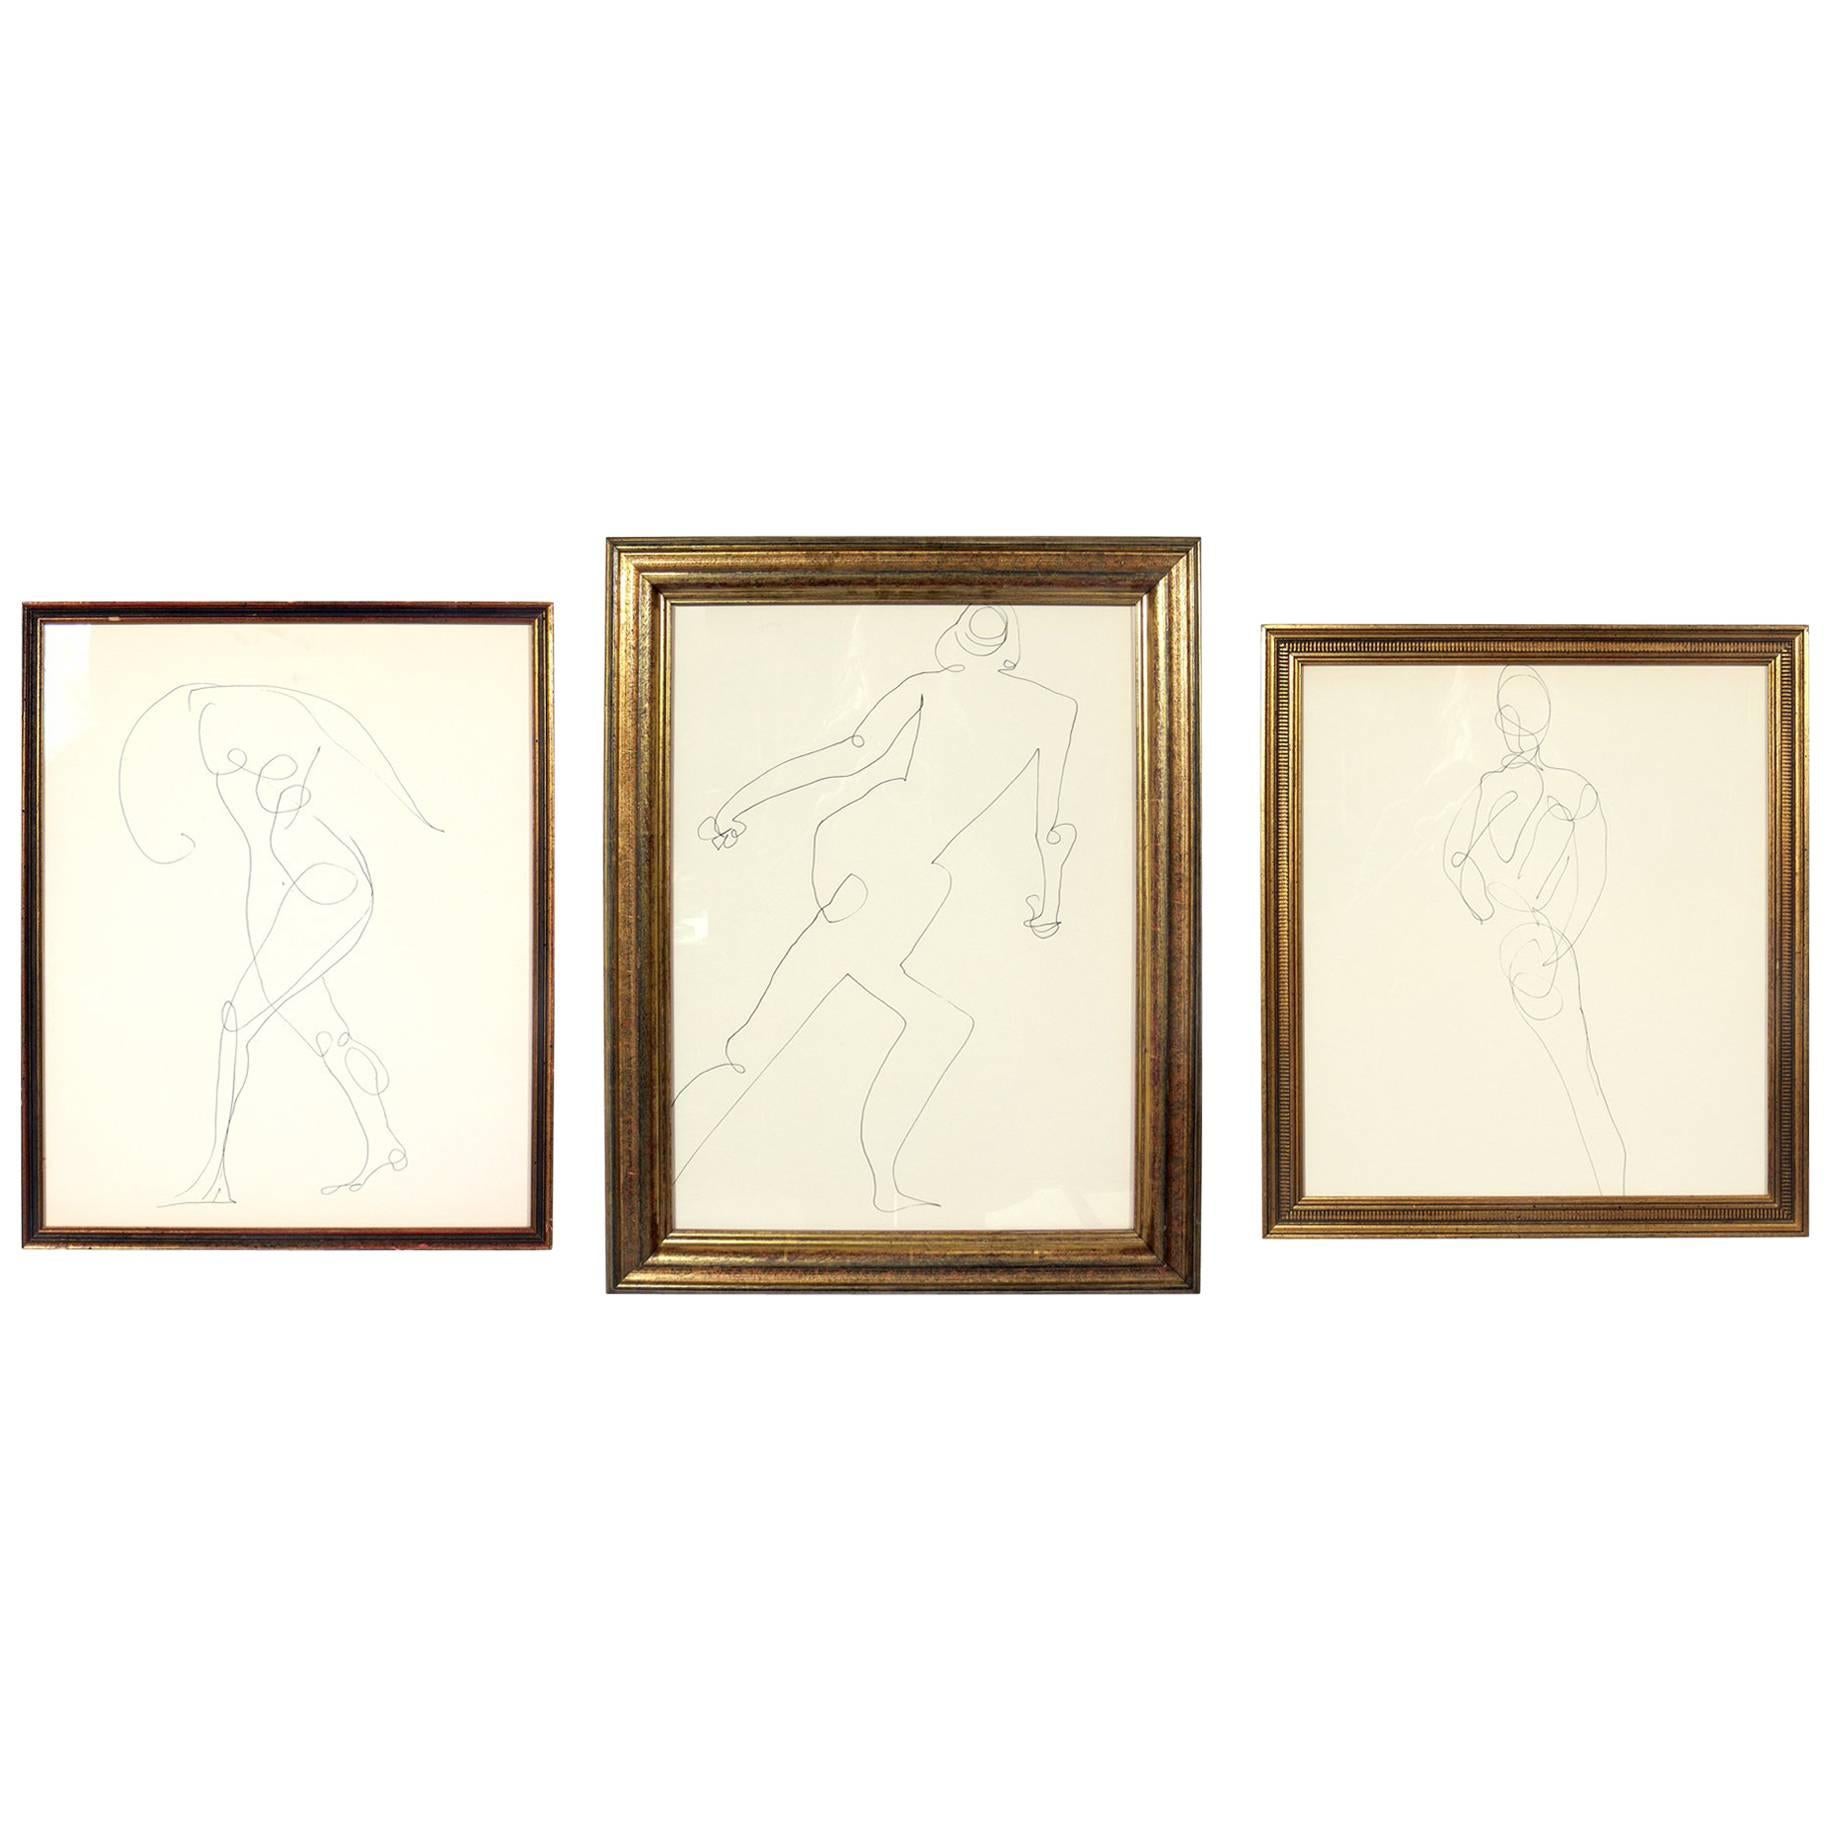 Selection of Figural Line Drawings or Gallery Wall by Miriam Kubach